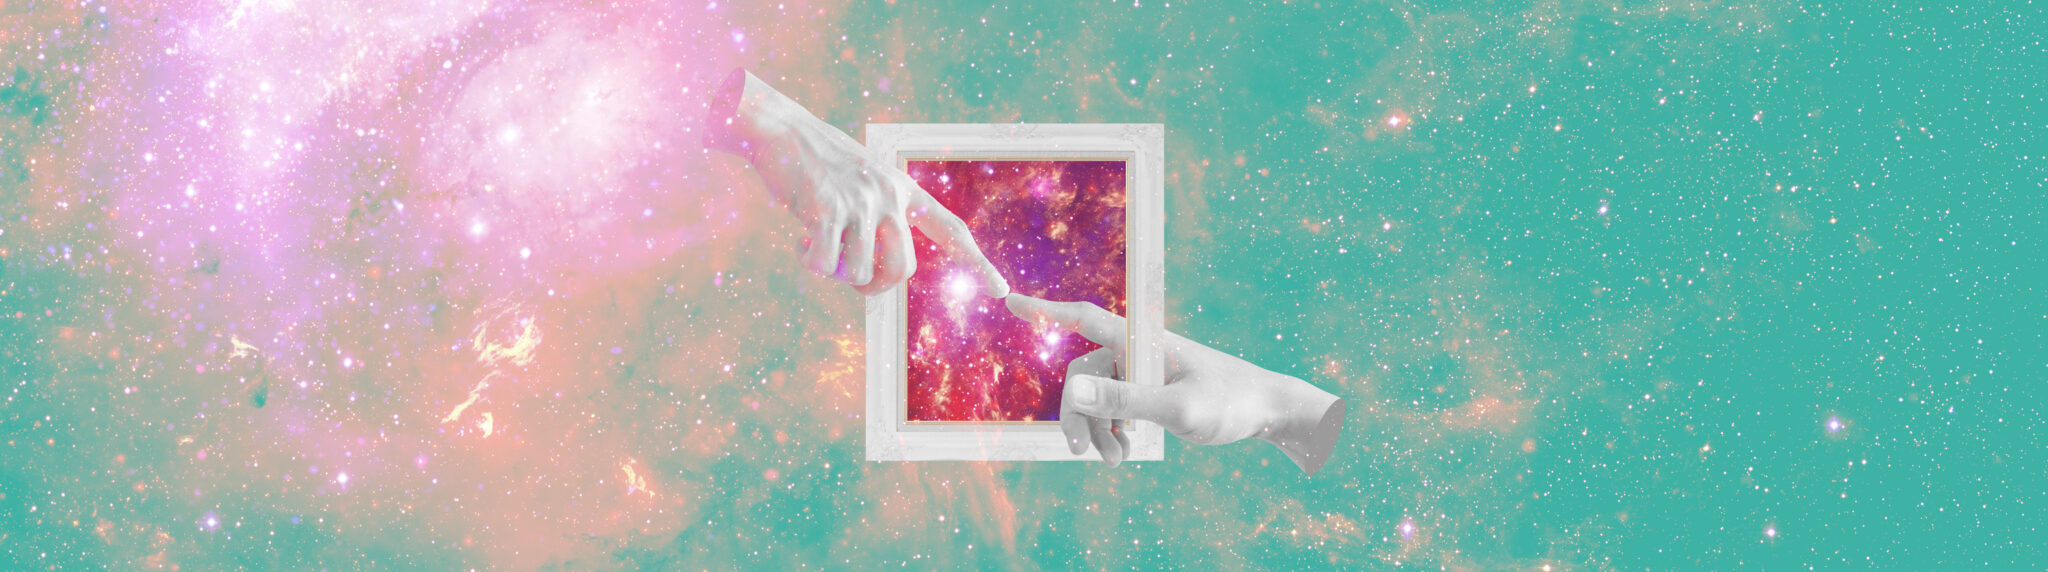 Digital,Collage,Modern,Art.,Hands,,Pointing,Finger,Through,Out,Of